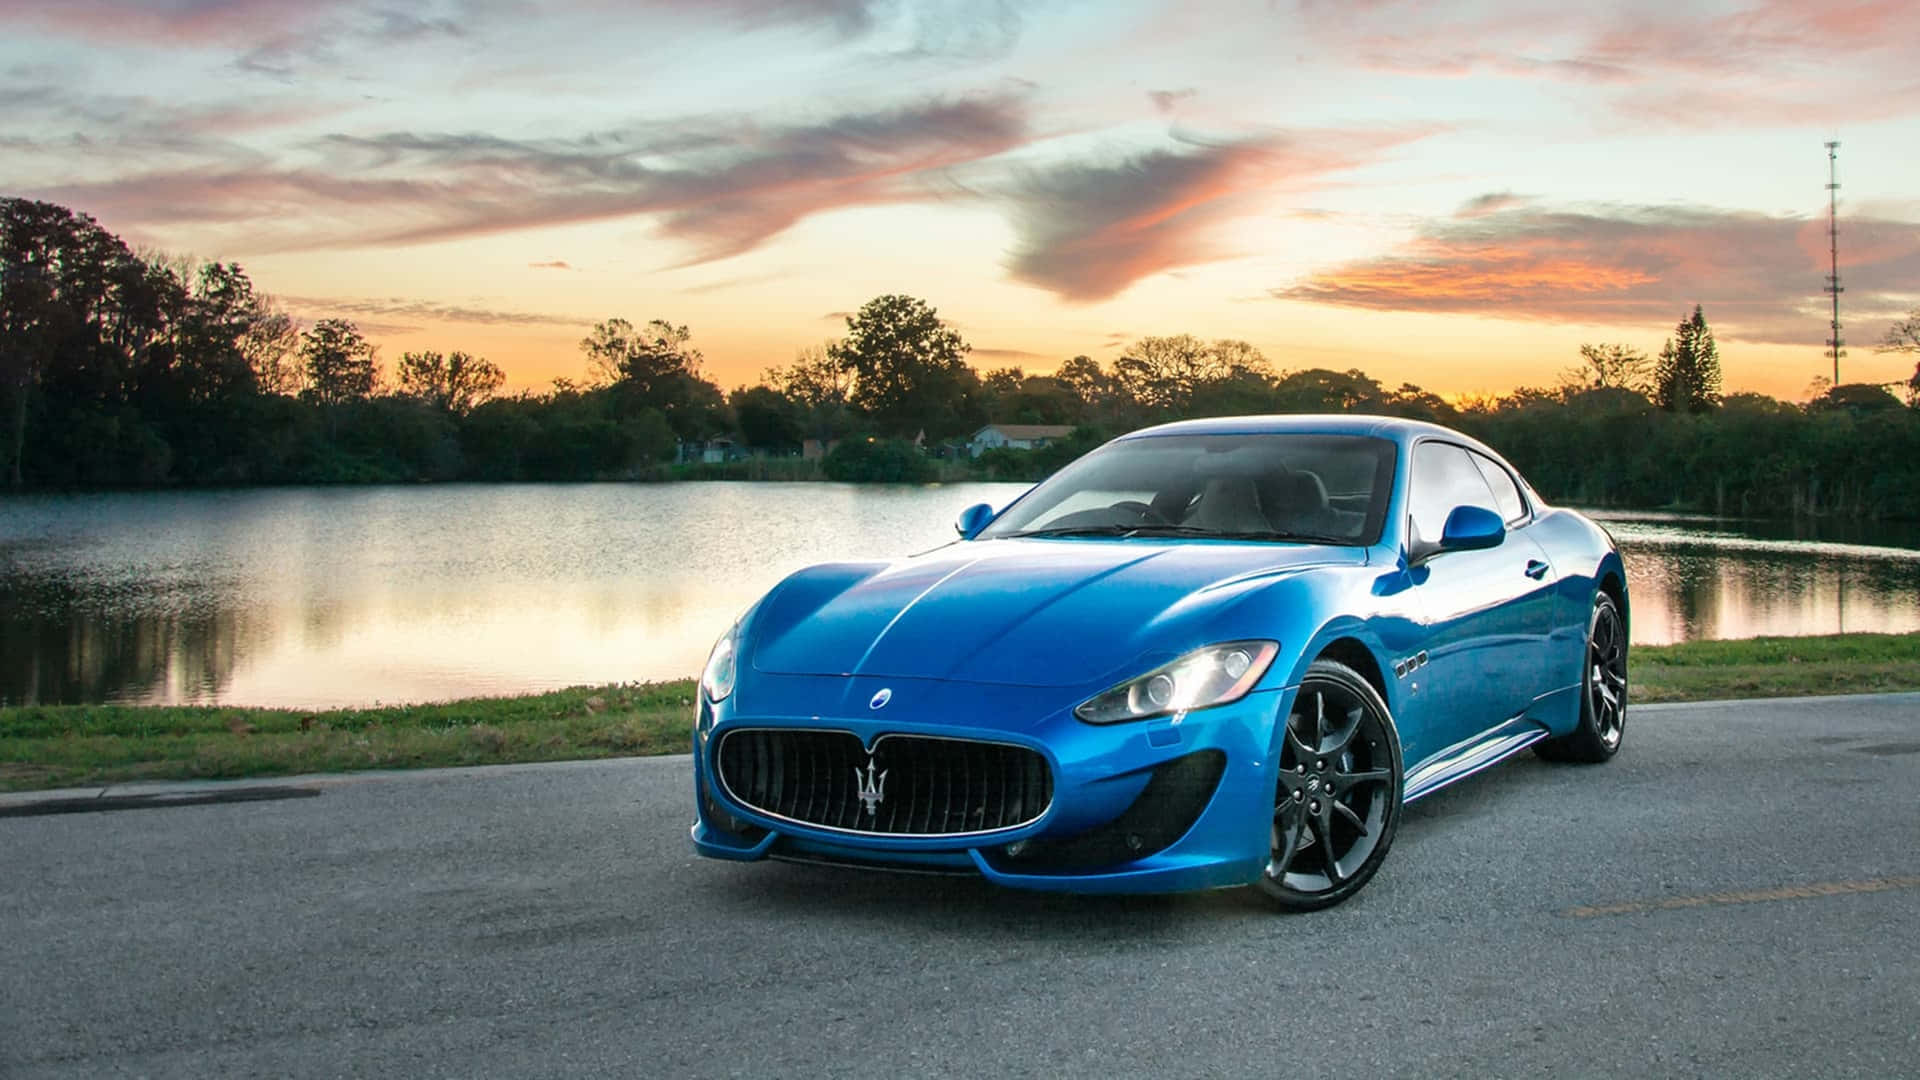 "The Ultimate Driving Experience: The magnificent 4k Maserati" Wallpaper